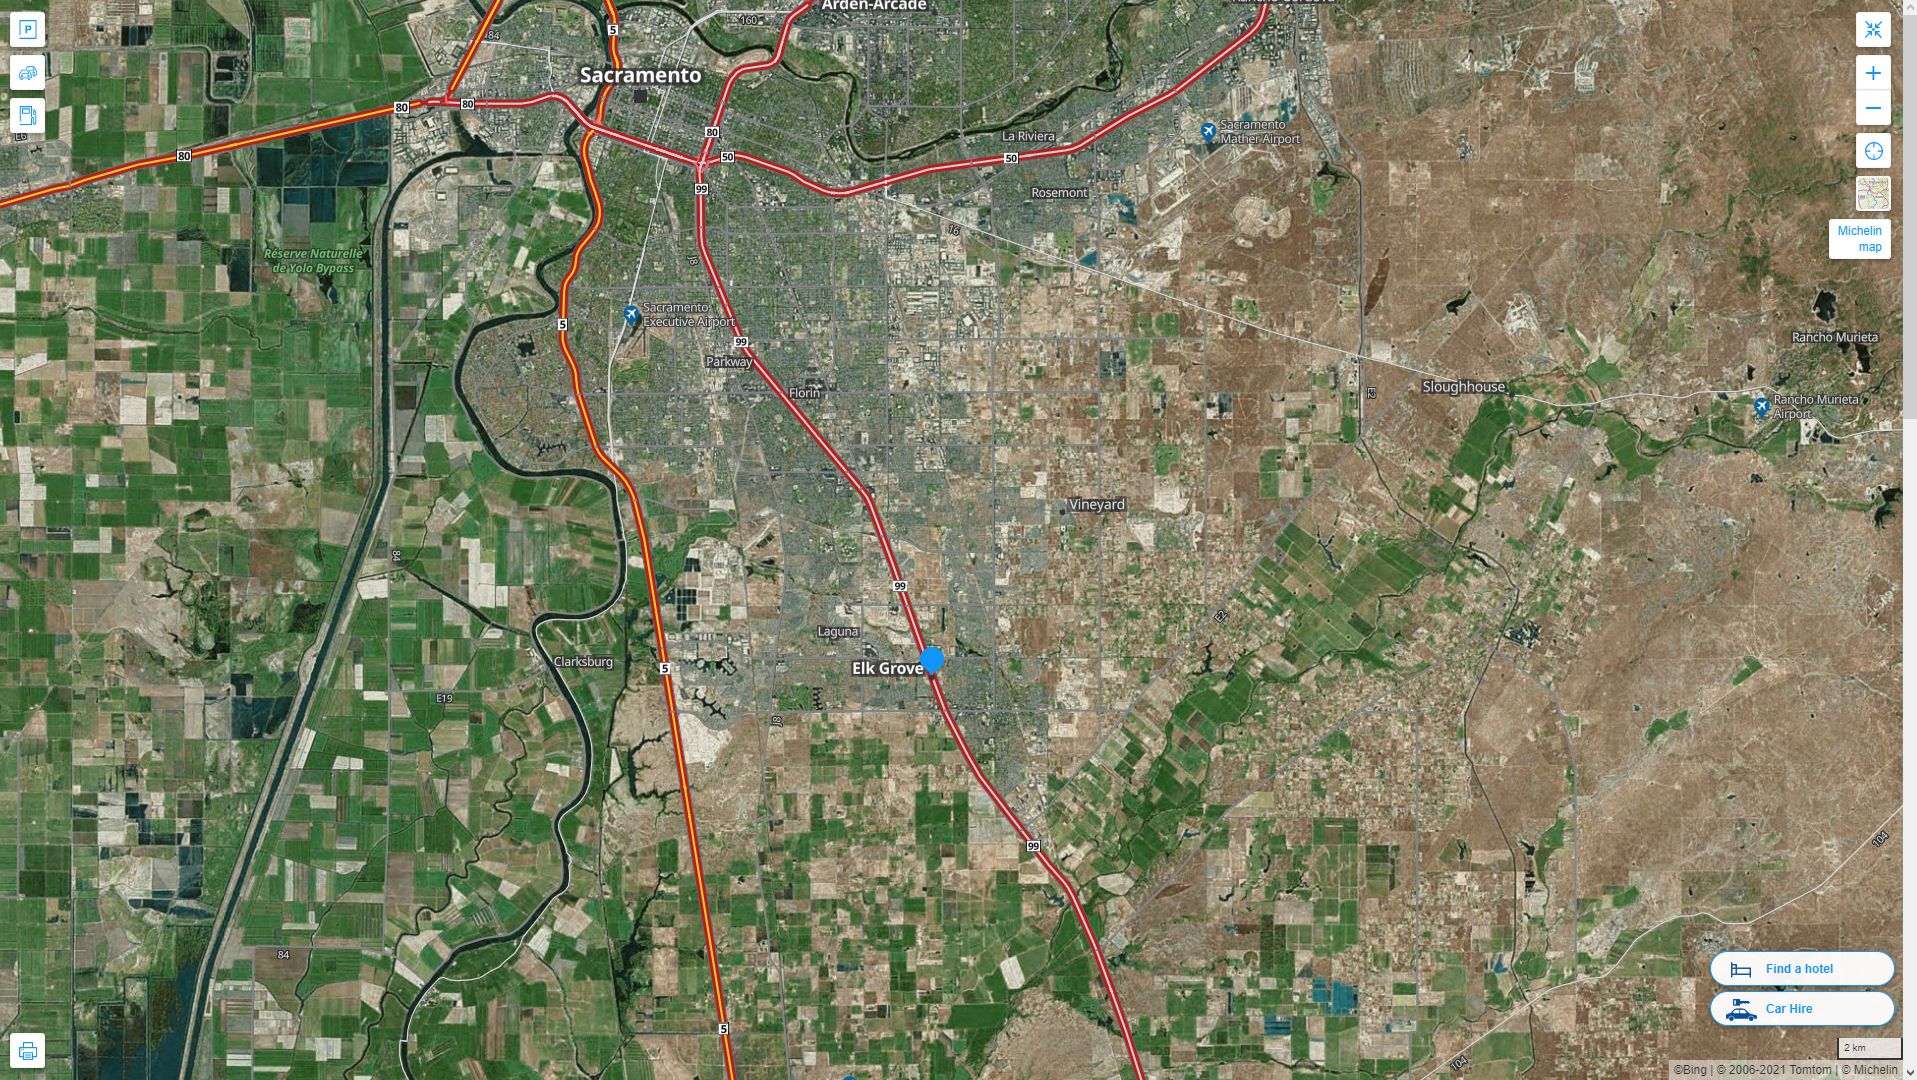 Elk Grove California Highway and Road Map with Satellite View